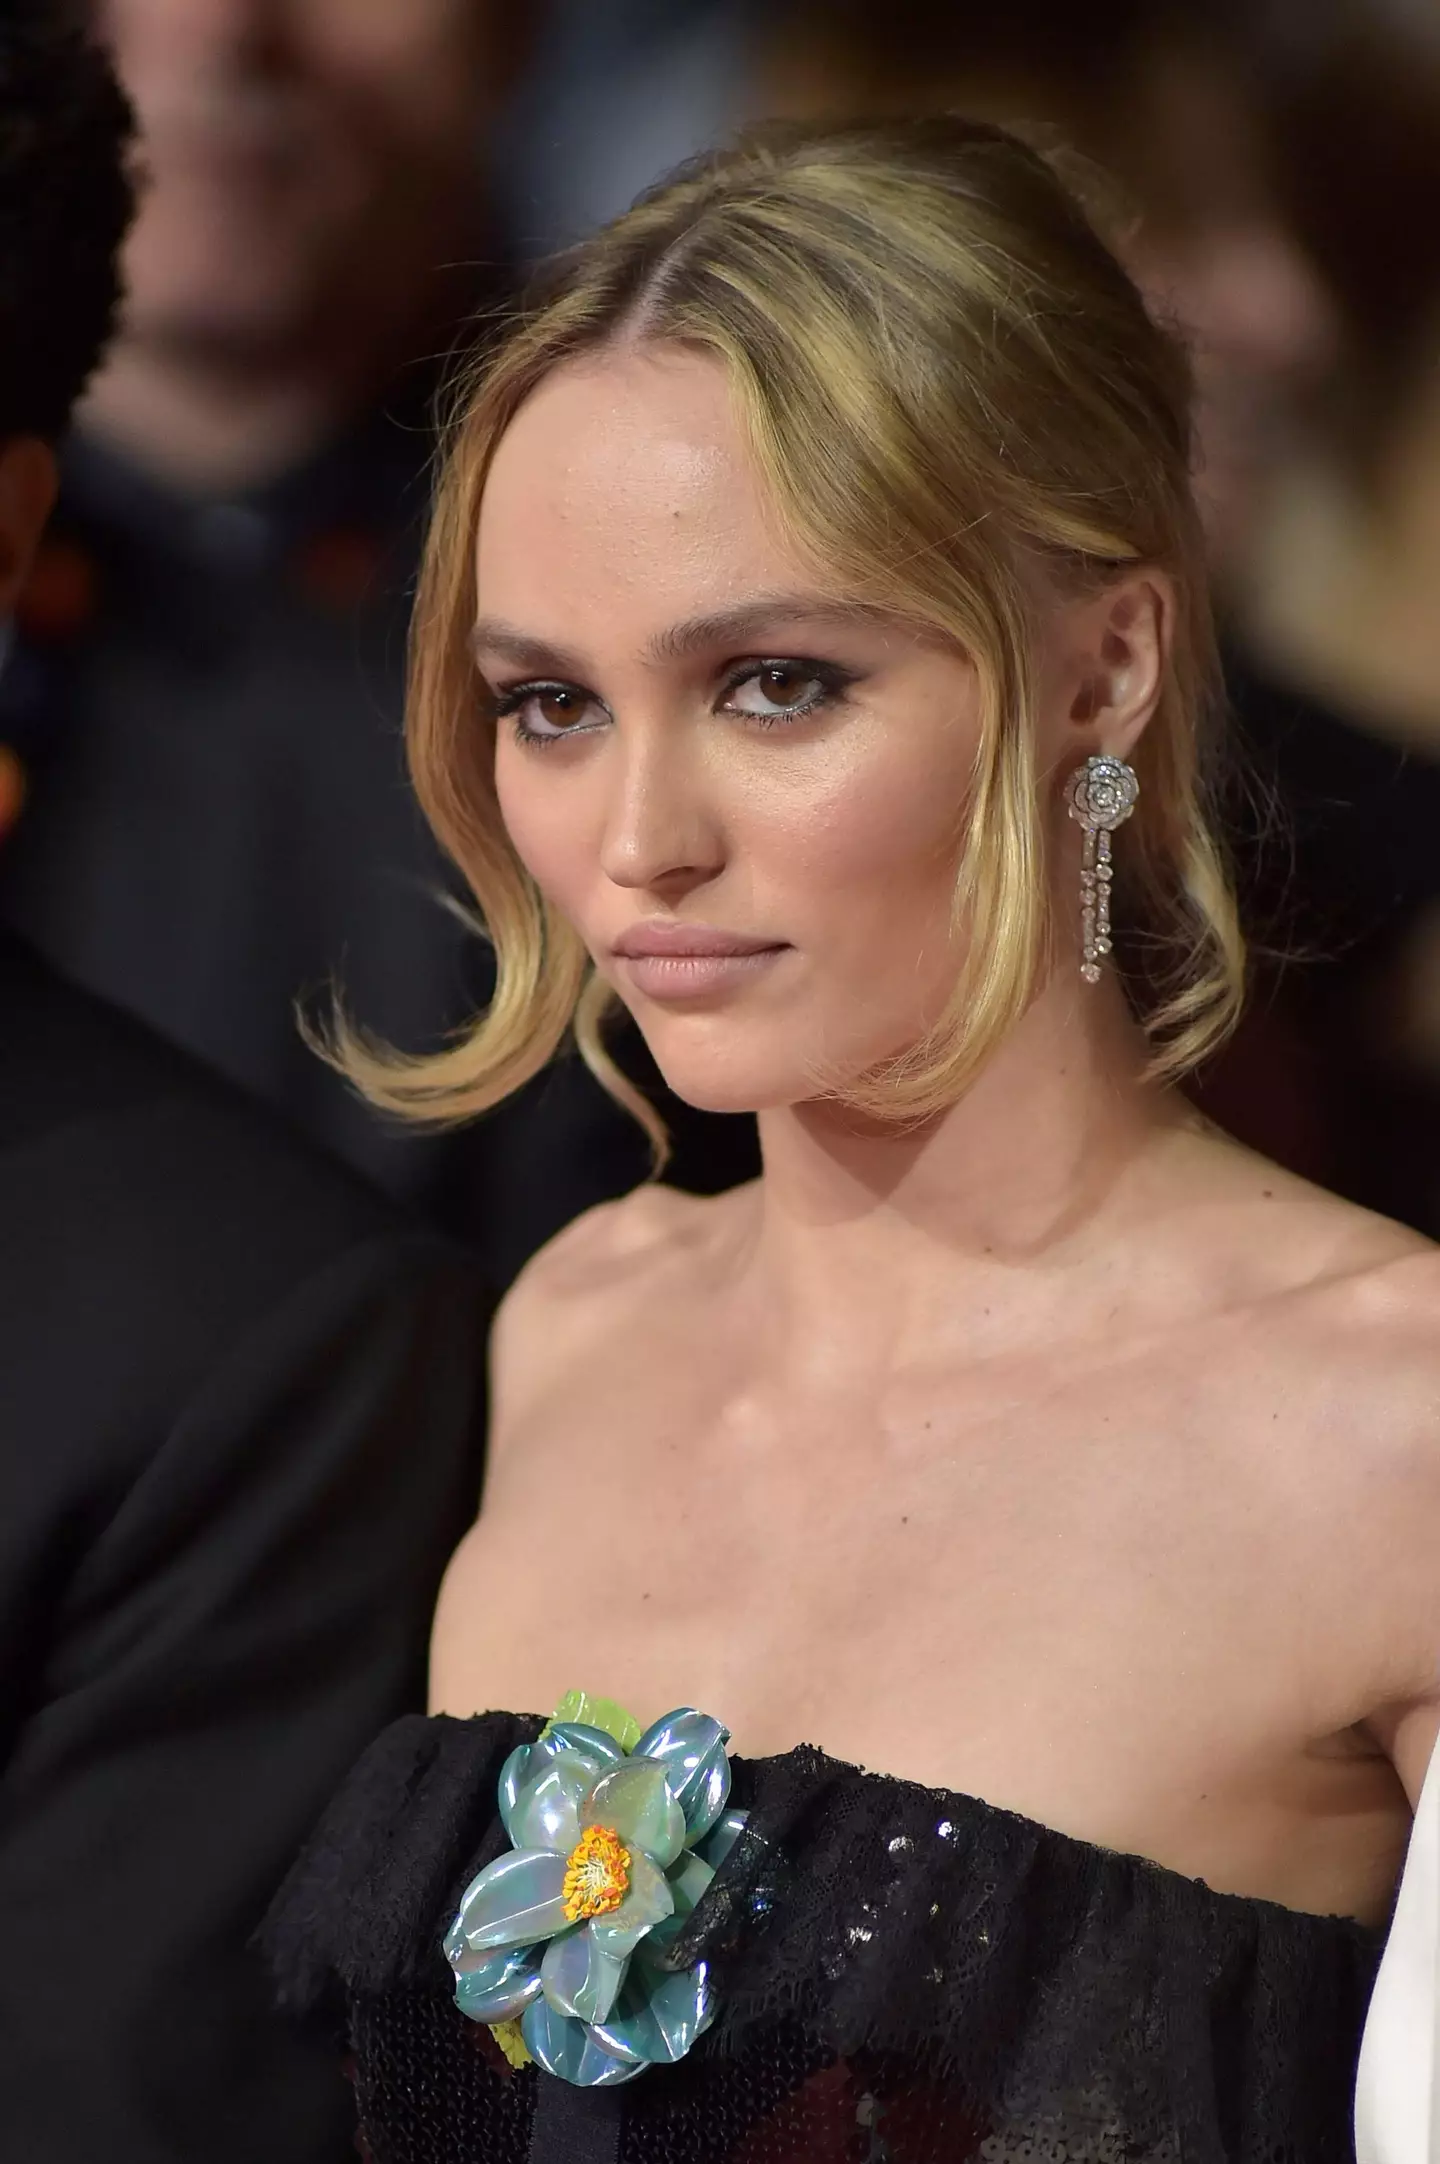 Lily-Rose Depp at the Cannes Film Festival.